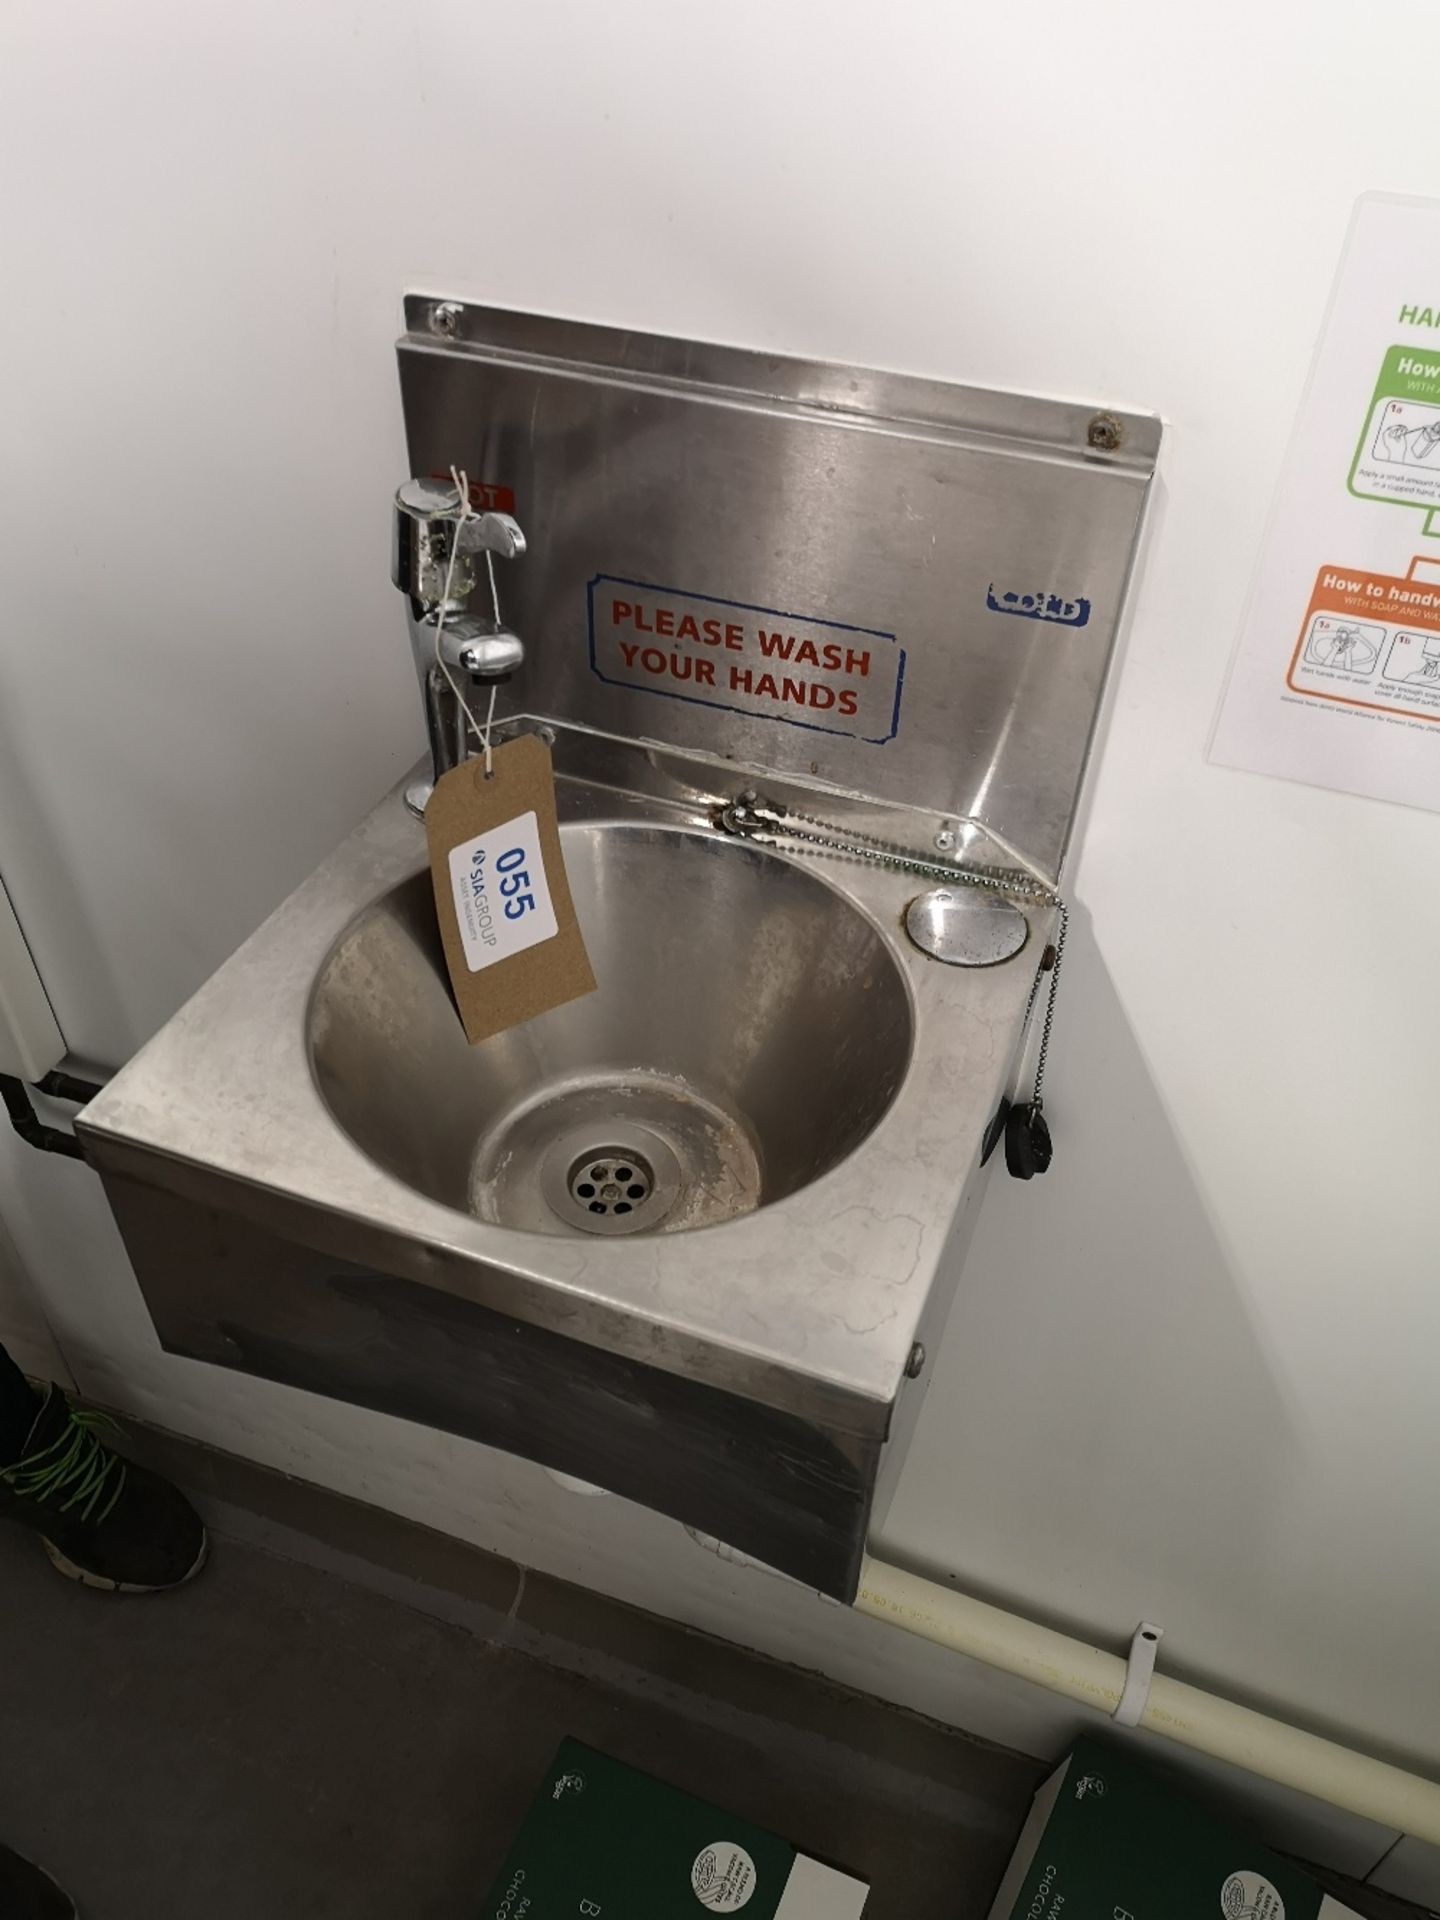 Stainless Steel Wall Fixed Hand Wash Basin - Image 2 of 2